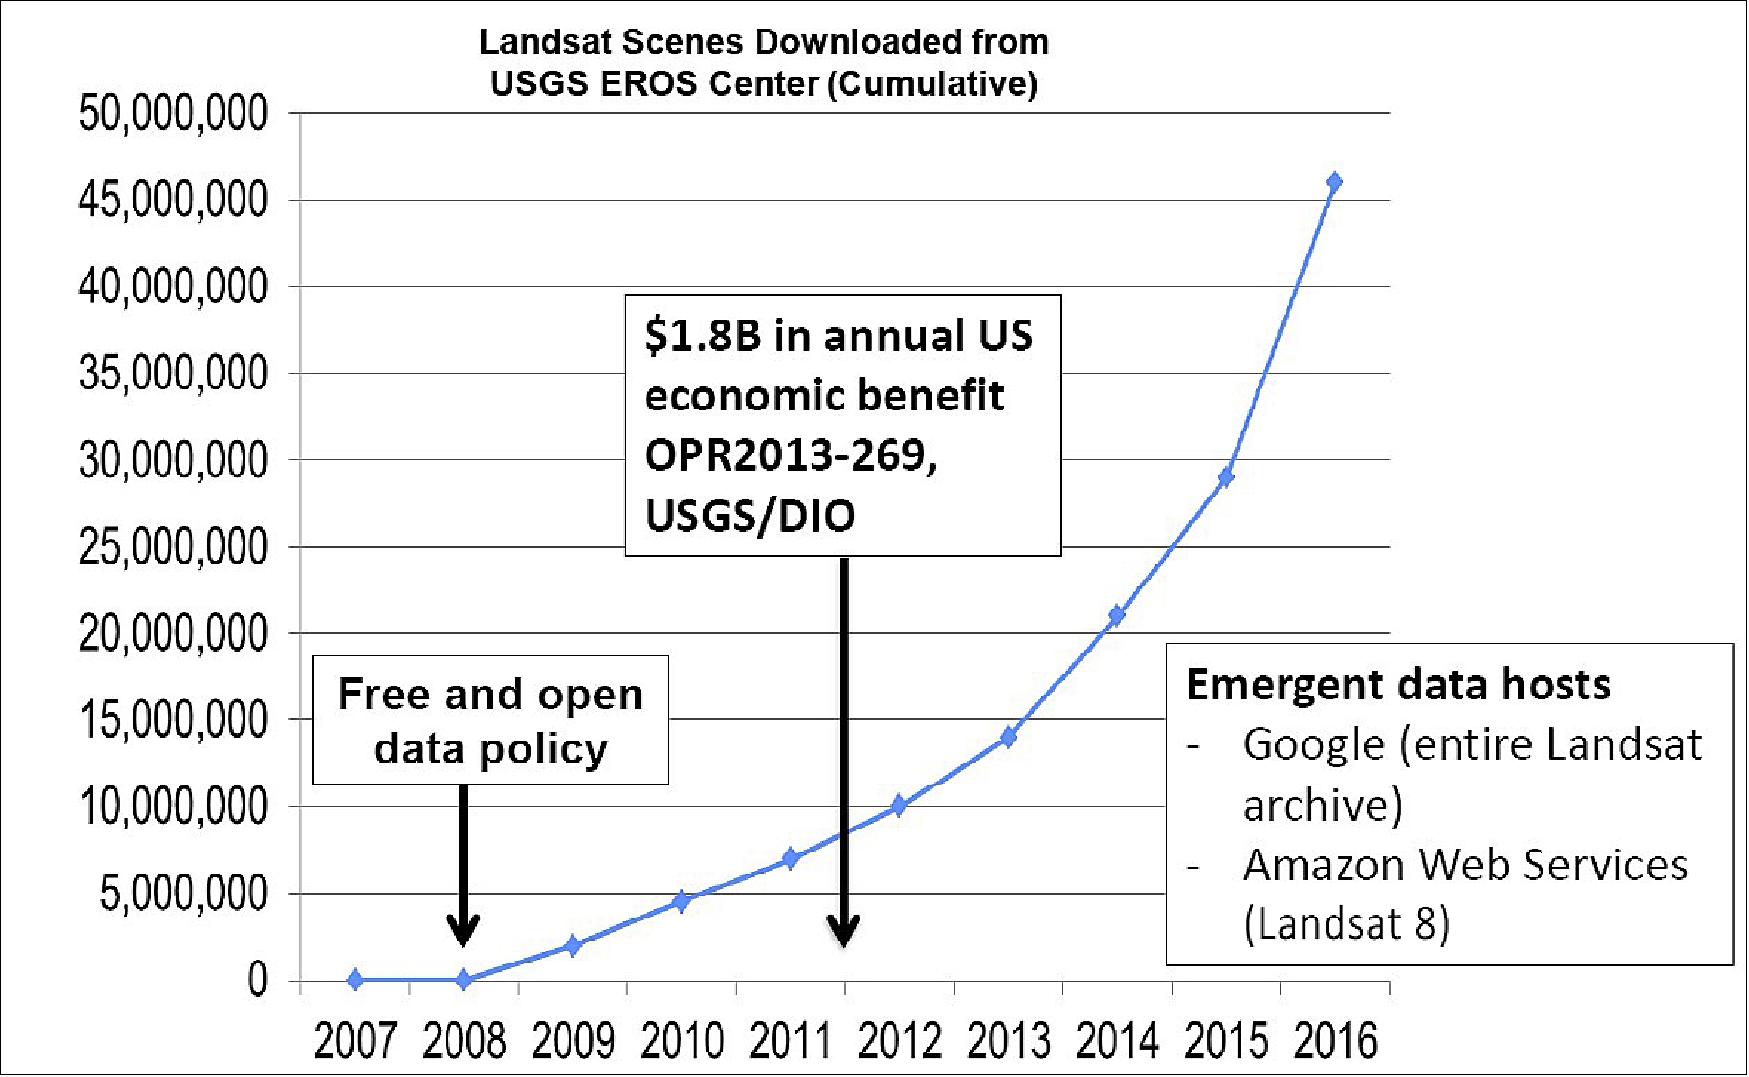 Figure 17: Free and Open Data Changed Everything. The download rate for Landsat data has increased rapidly since USGS removed the cost for online data access. This graph includes only downloads from the USGS EROS. [Google delivers approximately one-billion Landsat scenes to users per month, and Amazon Web Services (AWS) delivered that volume of scenes in its first year online (2015)]. The citation for U.S. economic benefit comes from USGS/Department of the Interior (DOI) data (image credit: USGS)